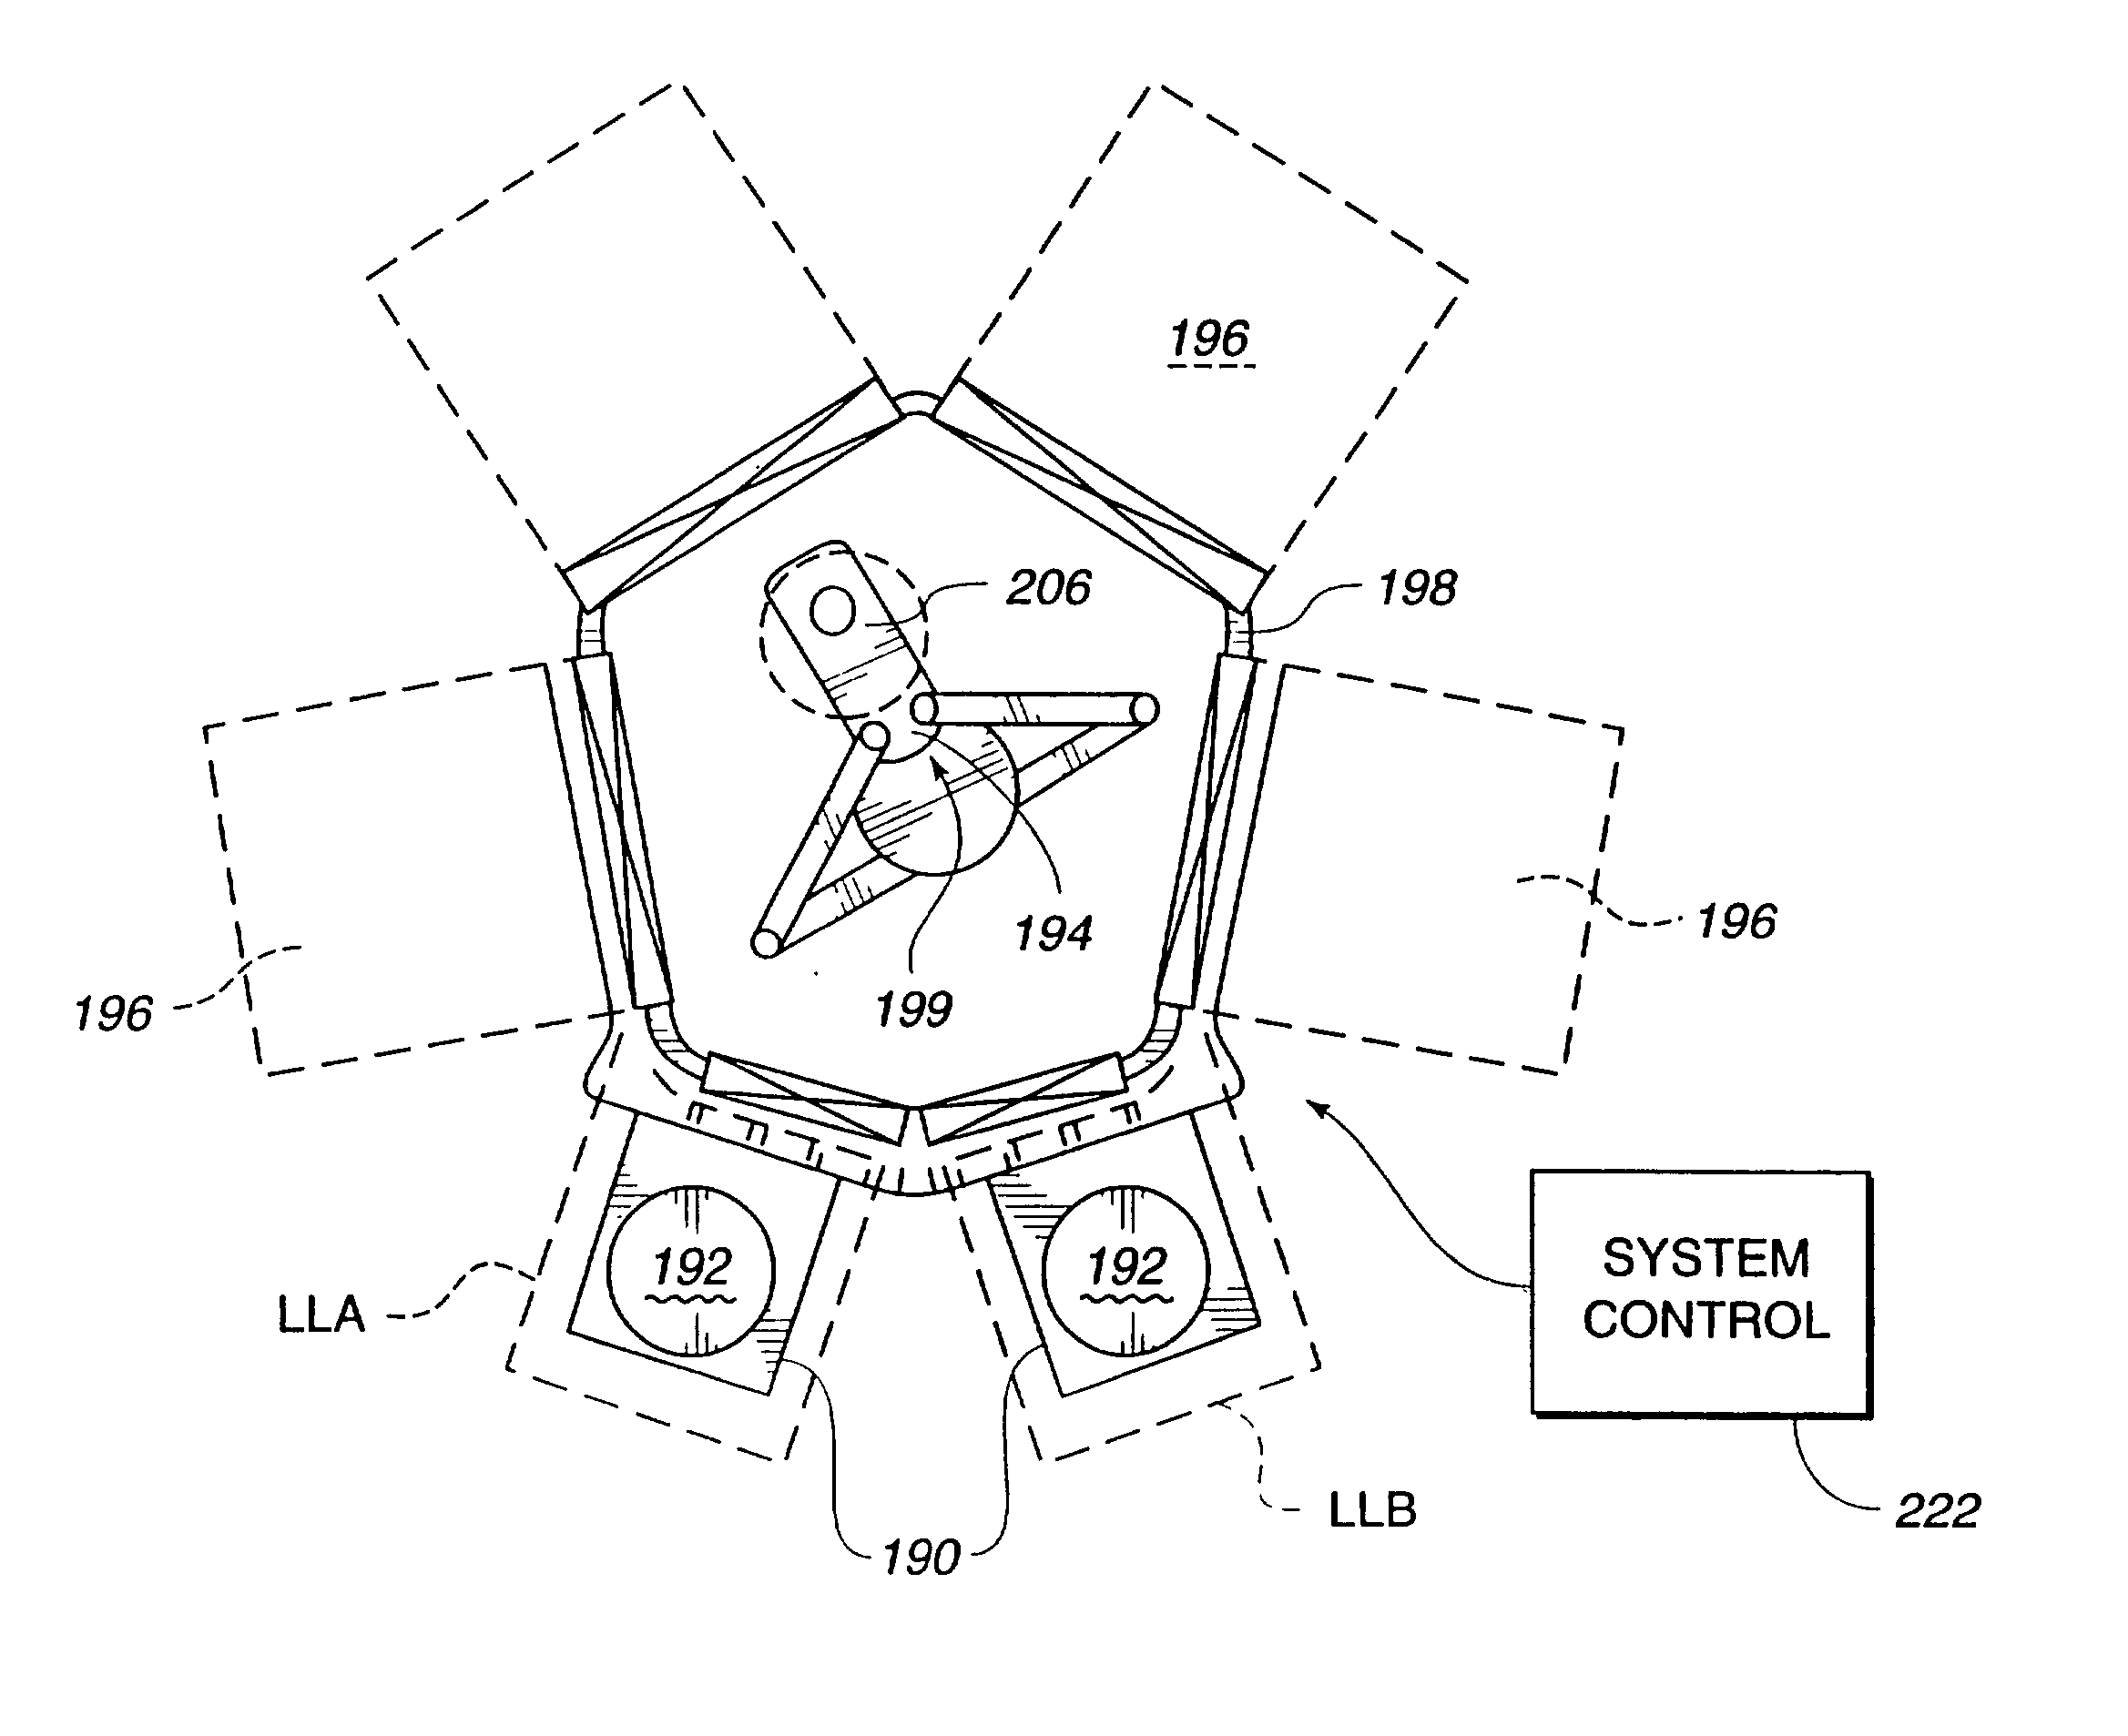 Method and apparatus for aligning a cassette